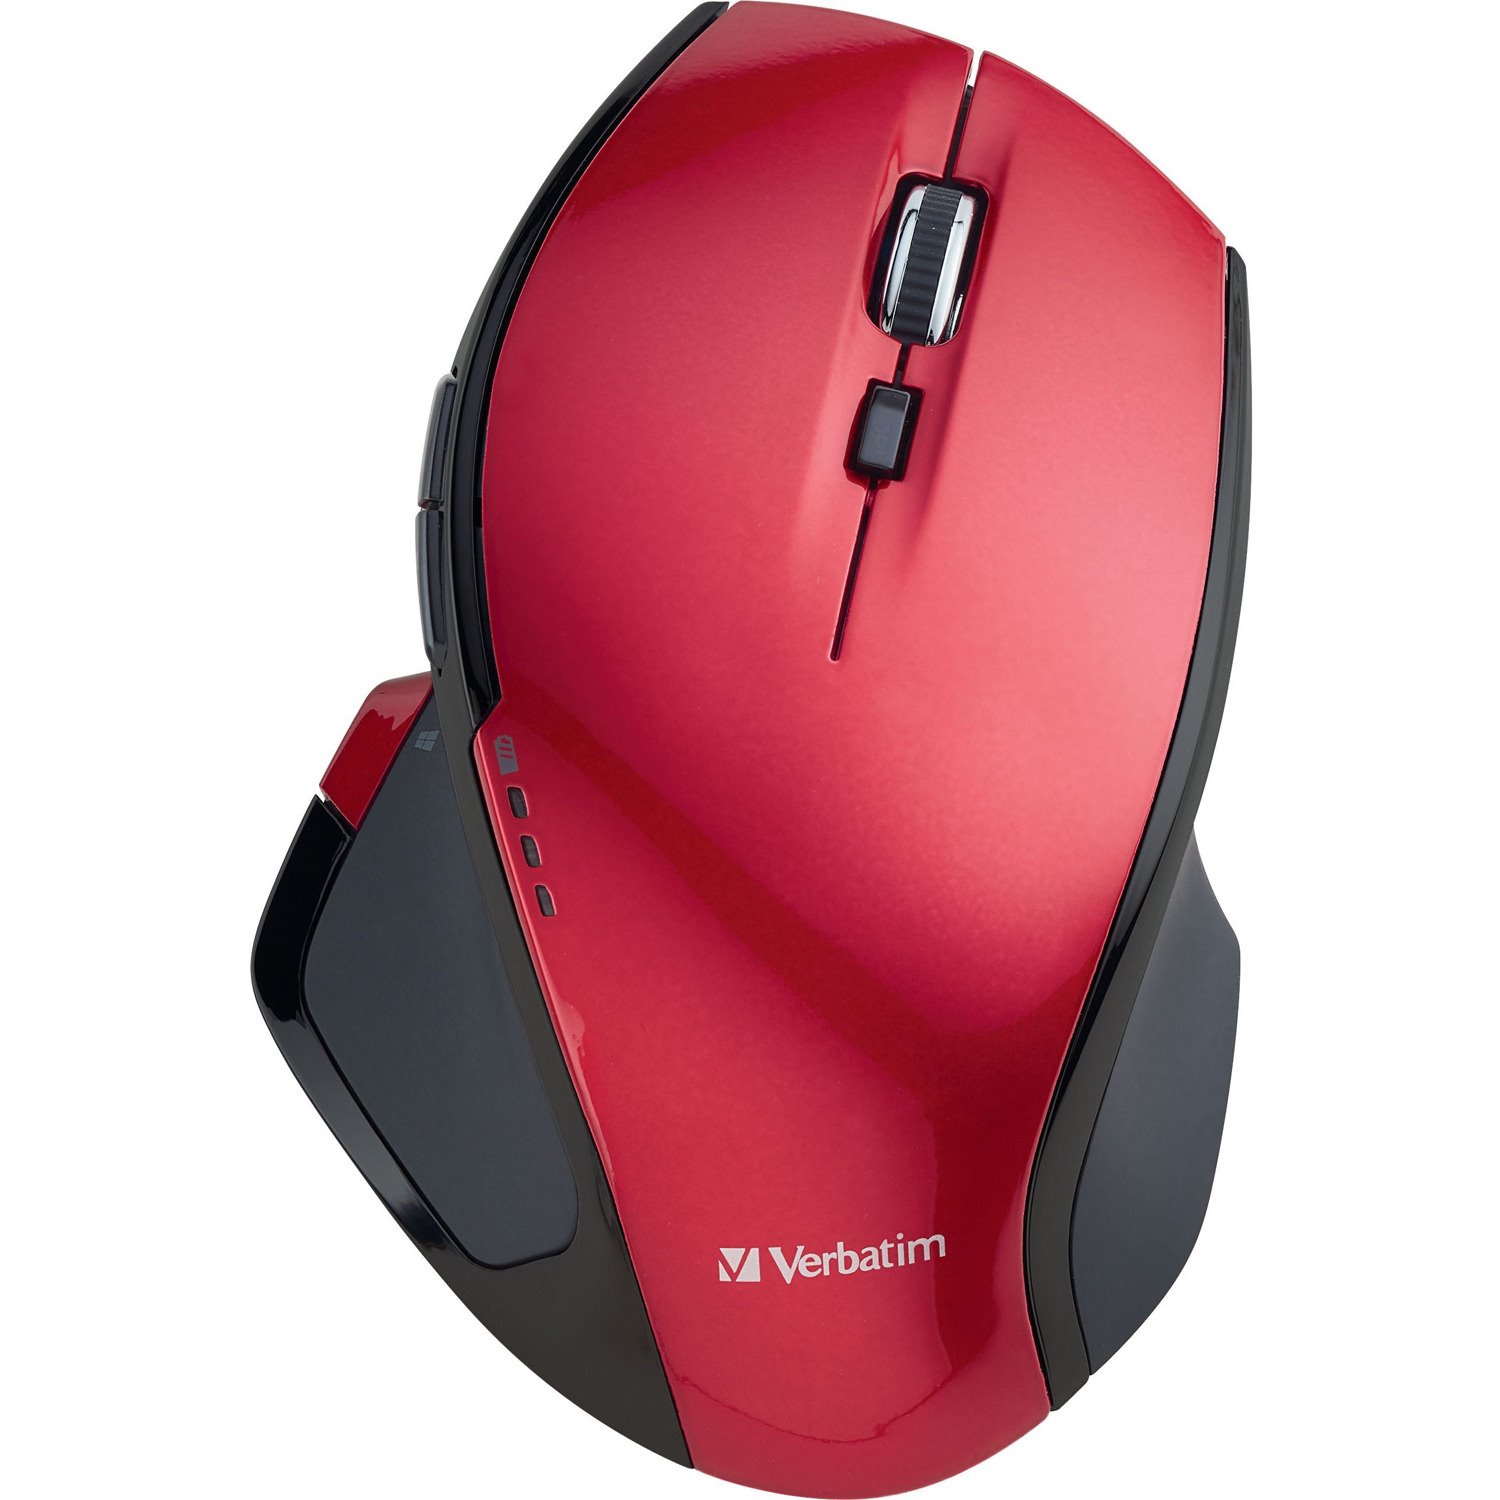 Verbatim Wireless Desktop 8-Button Deluxe Blue LED Mouse - Red